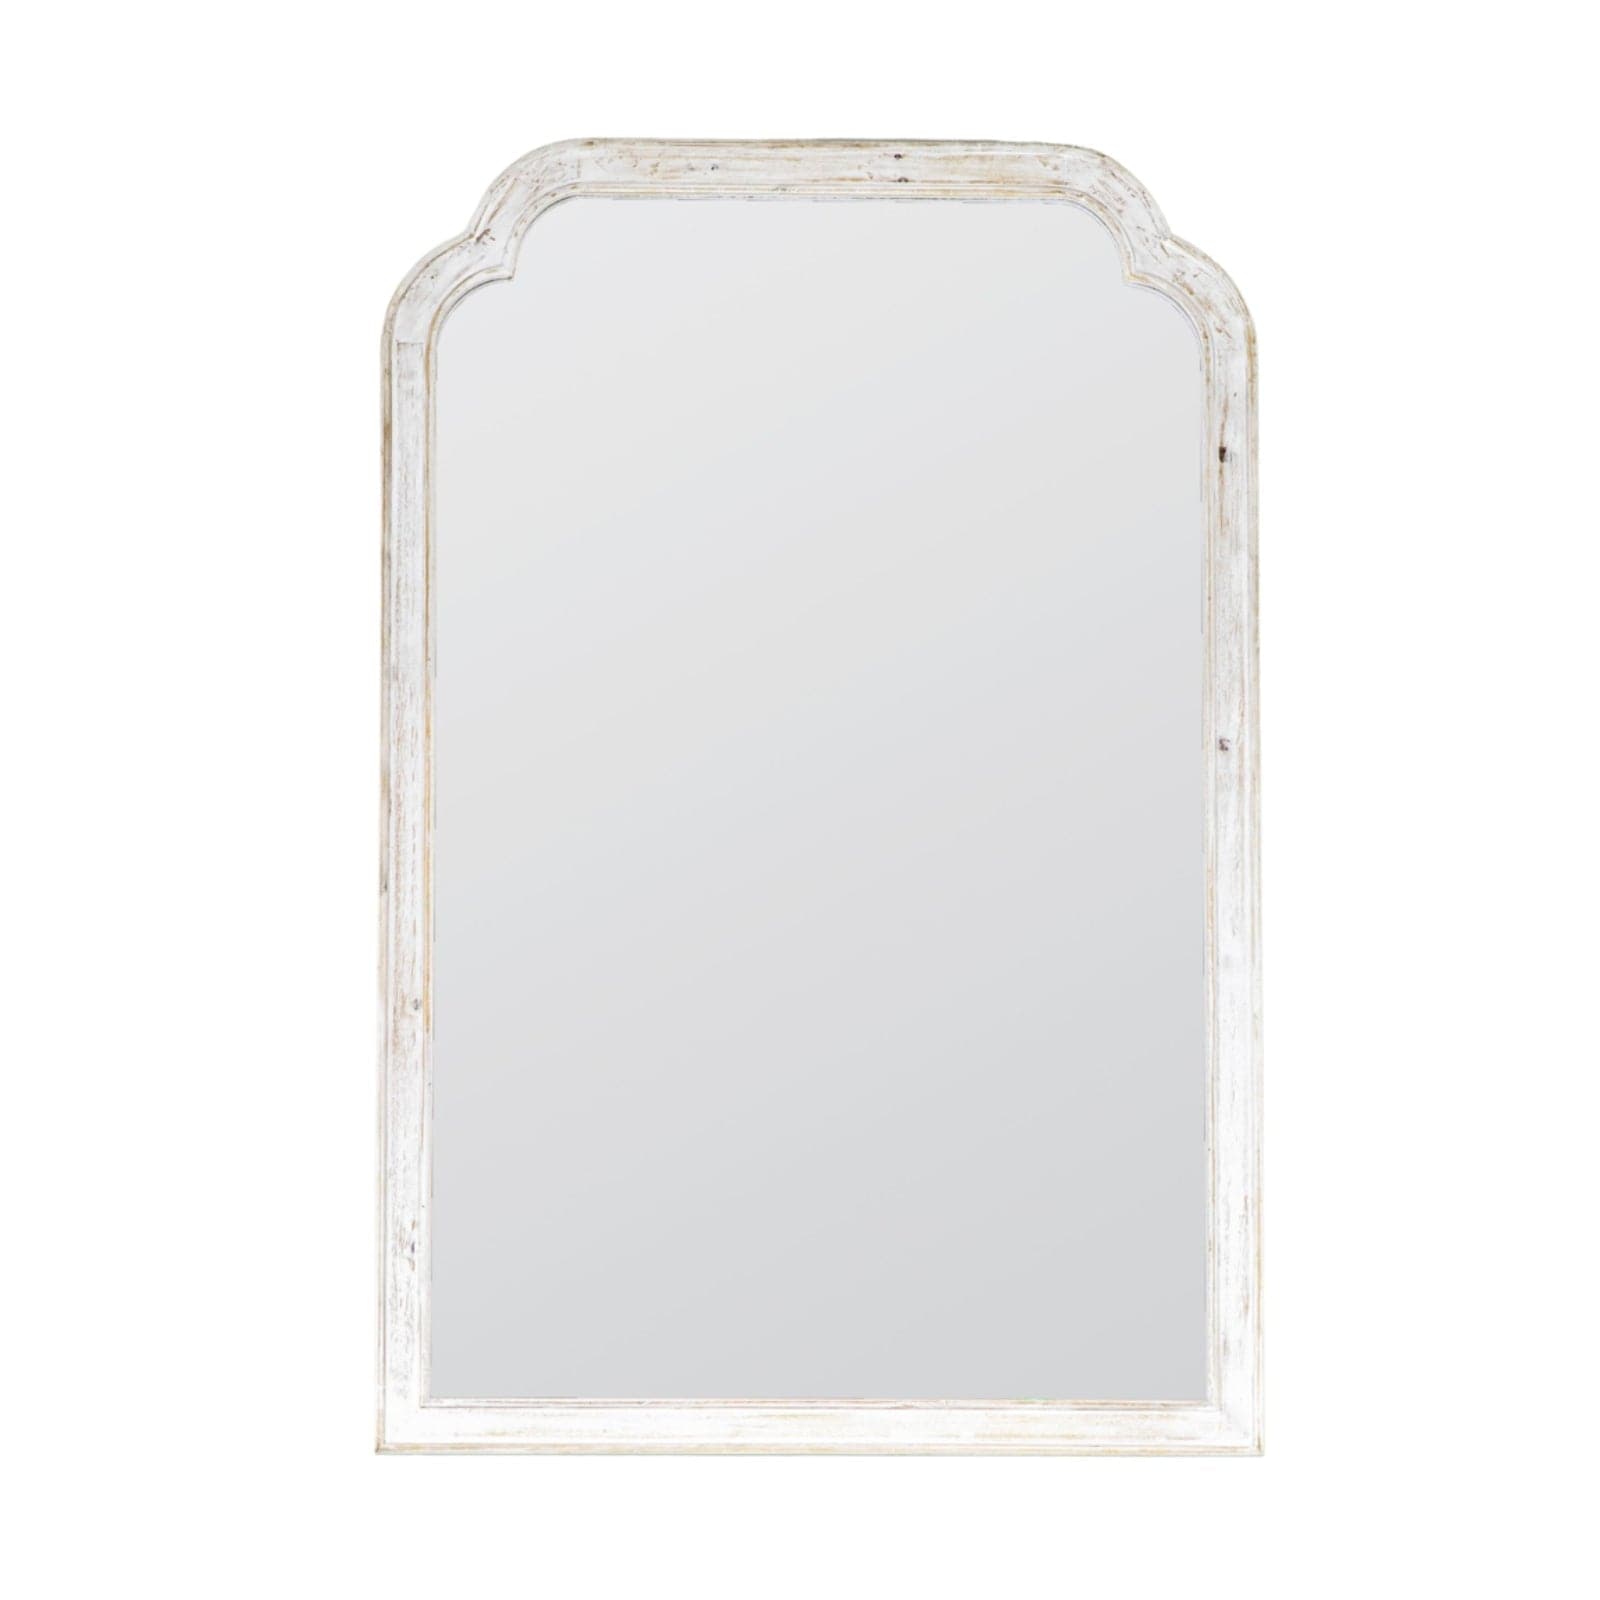 Distressed White Wooden Hatty Mirror - The Farthing